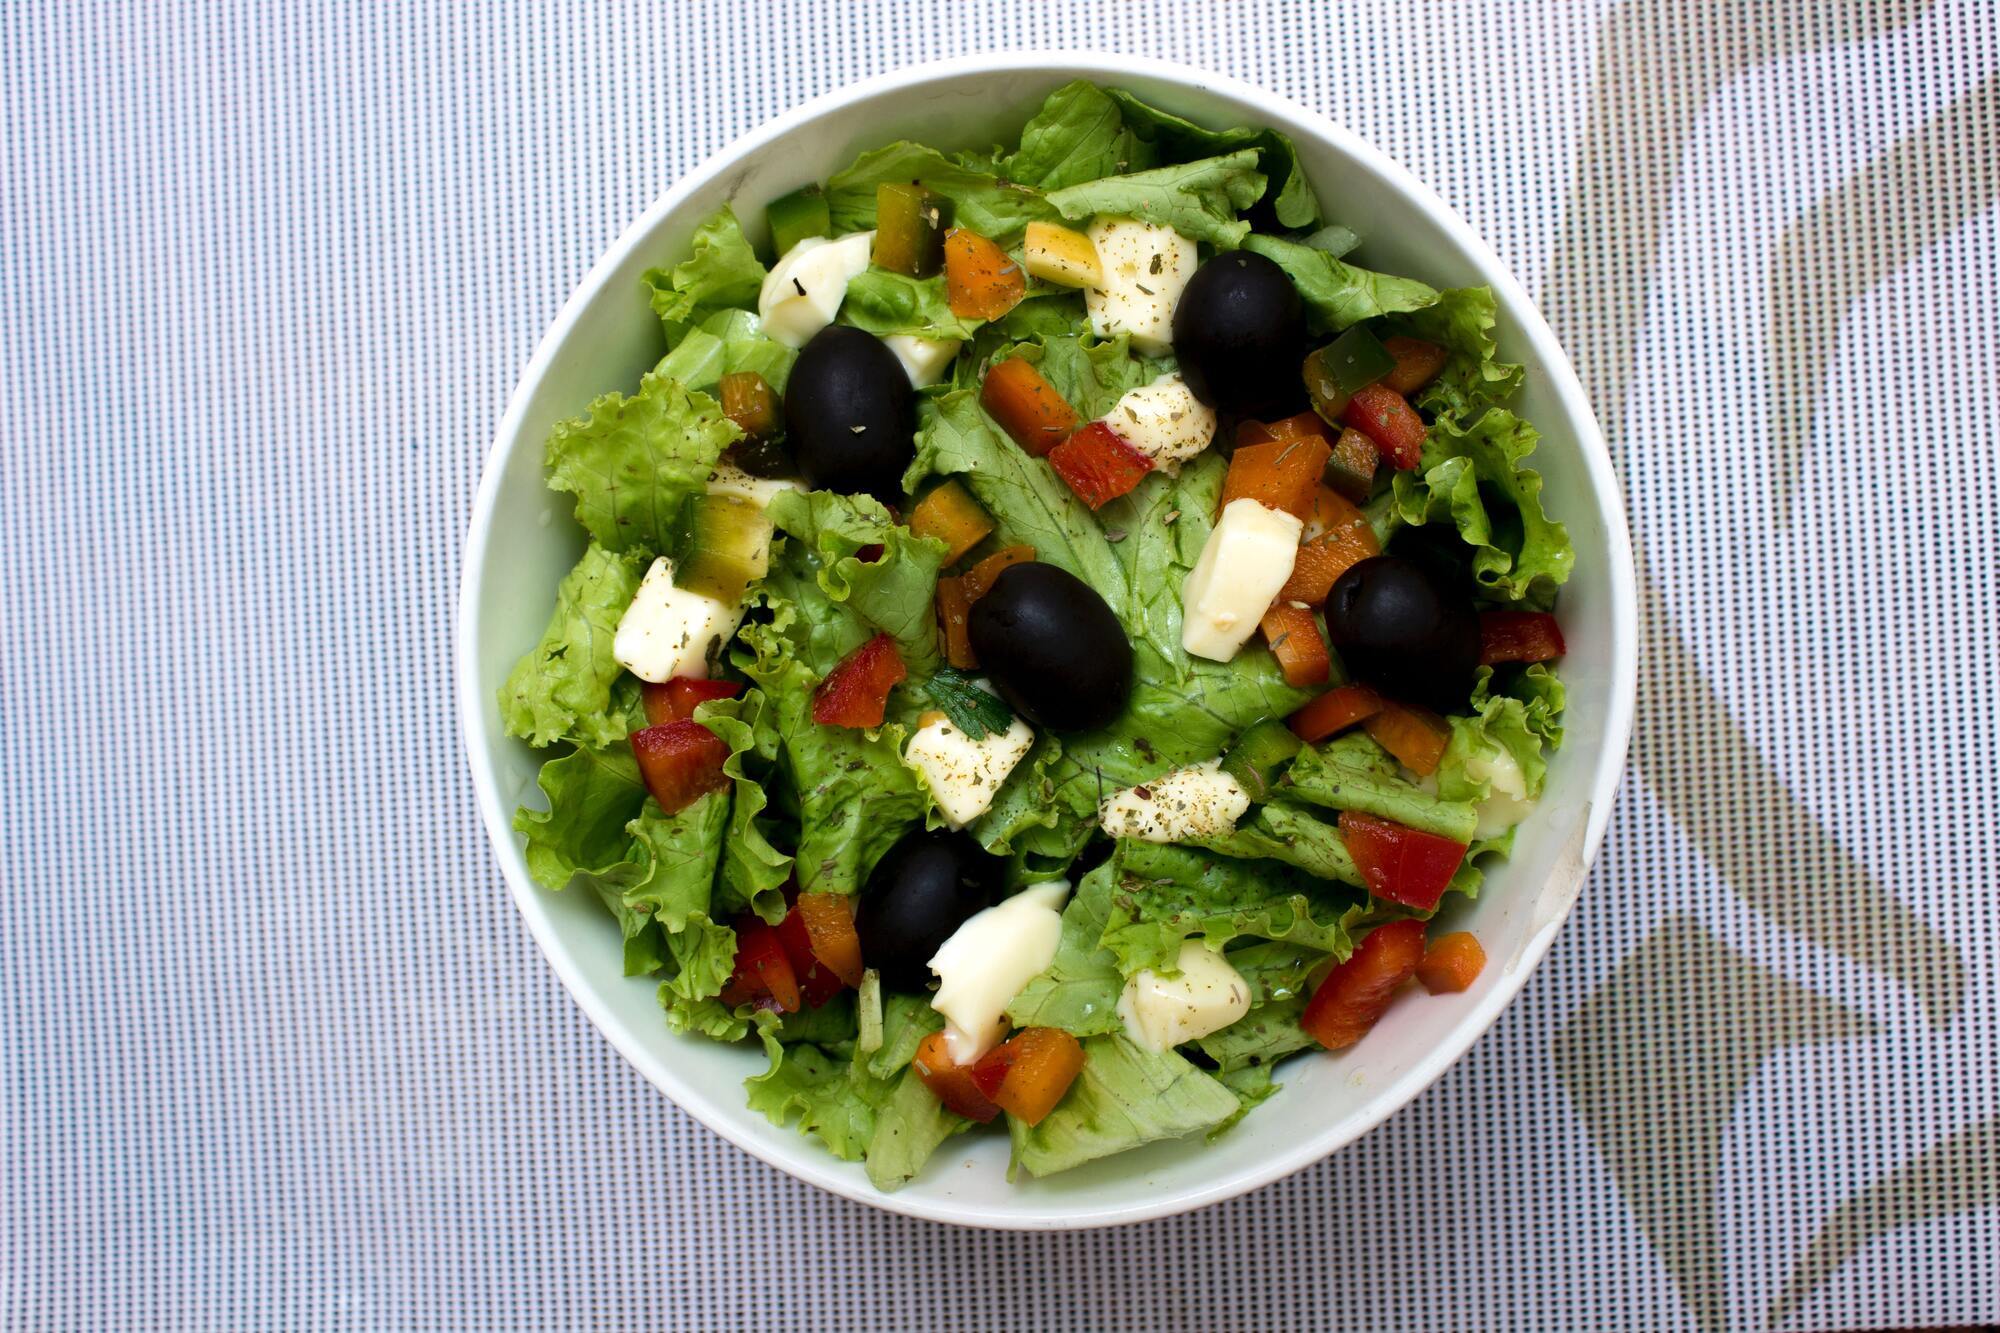 How to make Greek salad in a new way